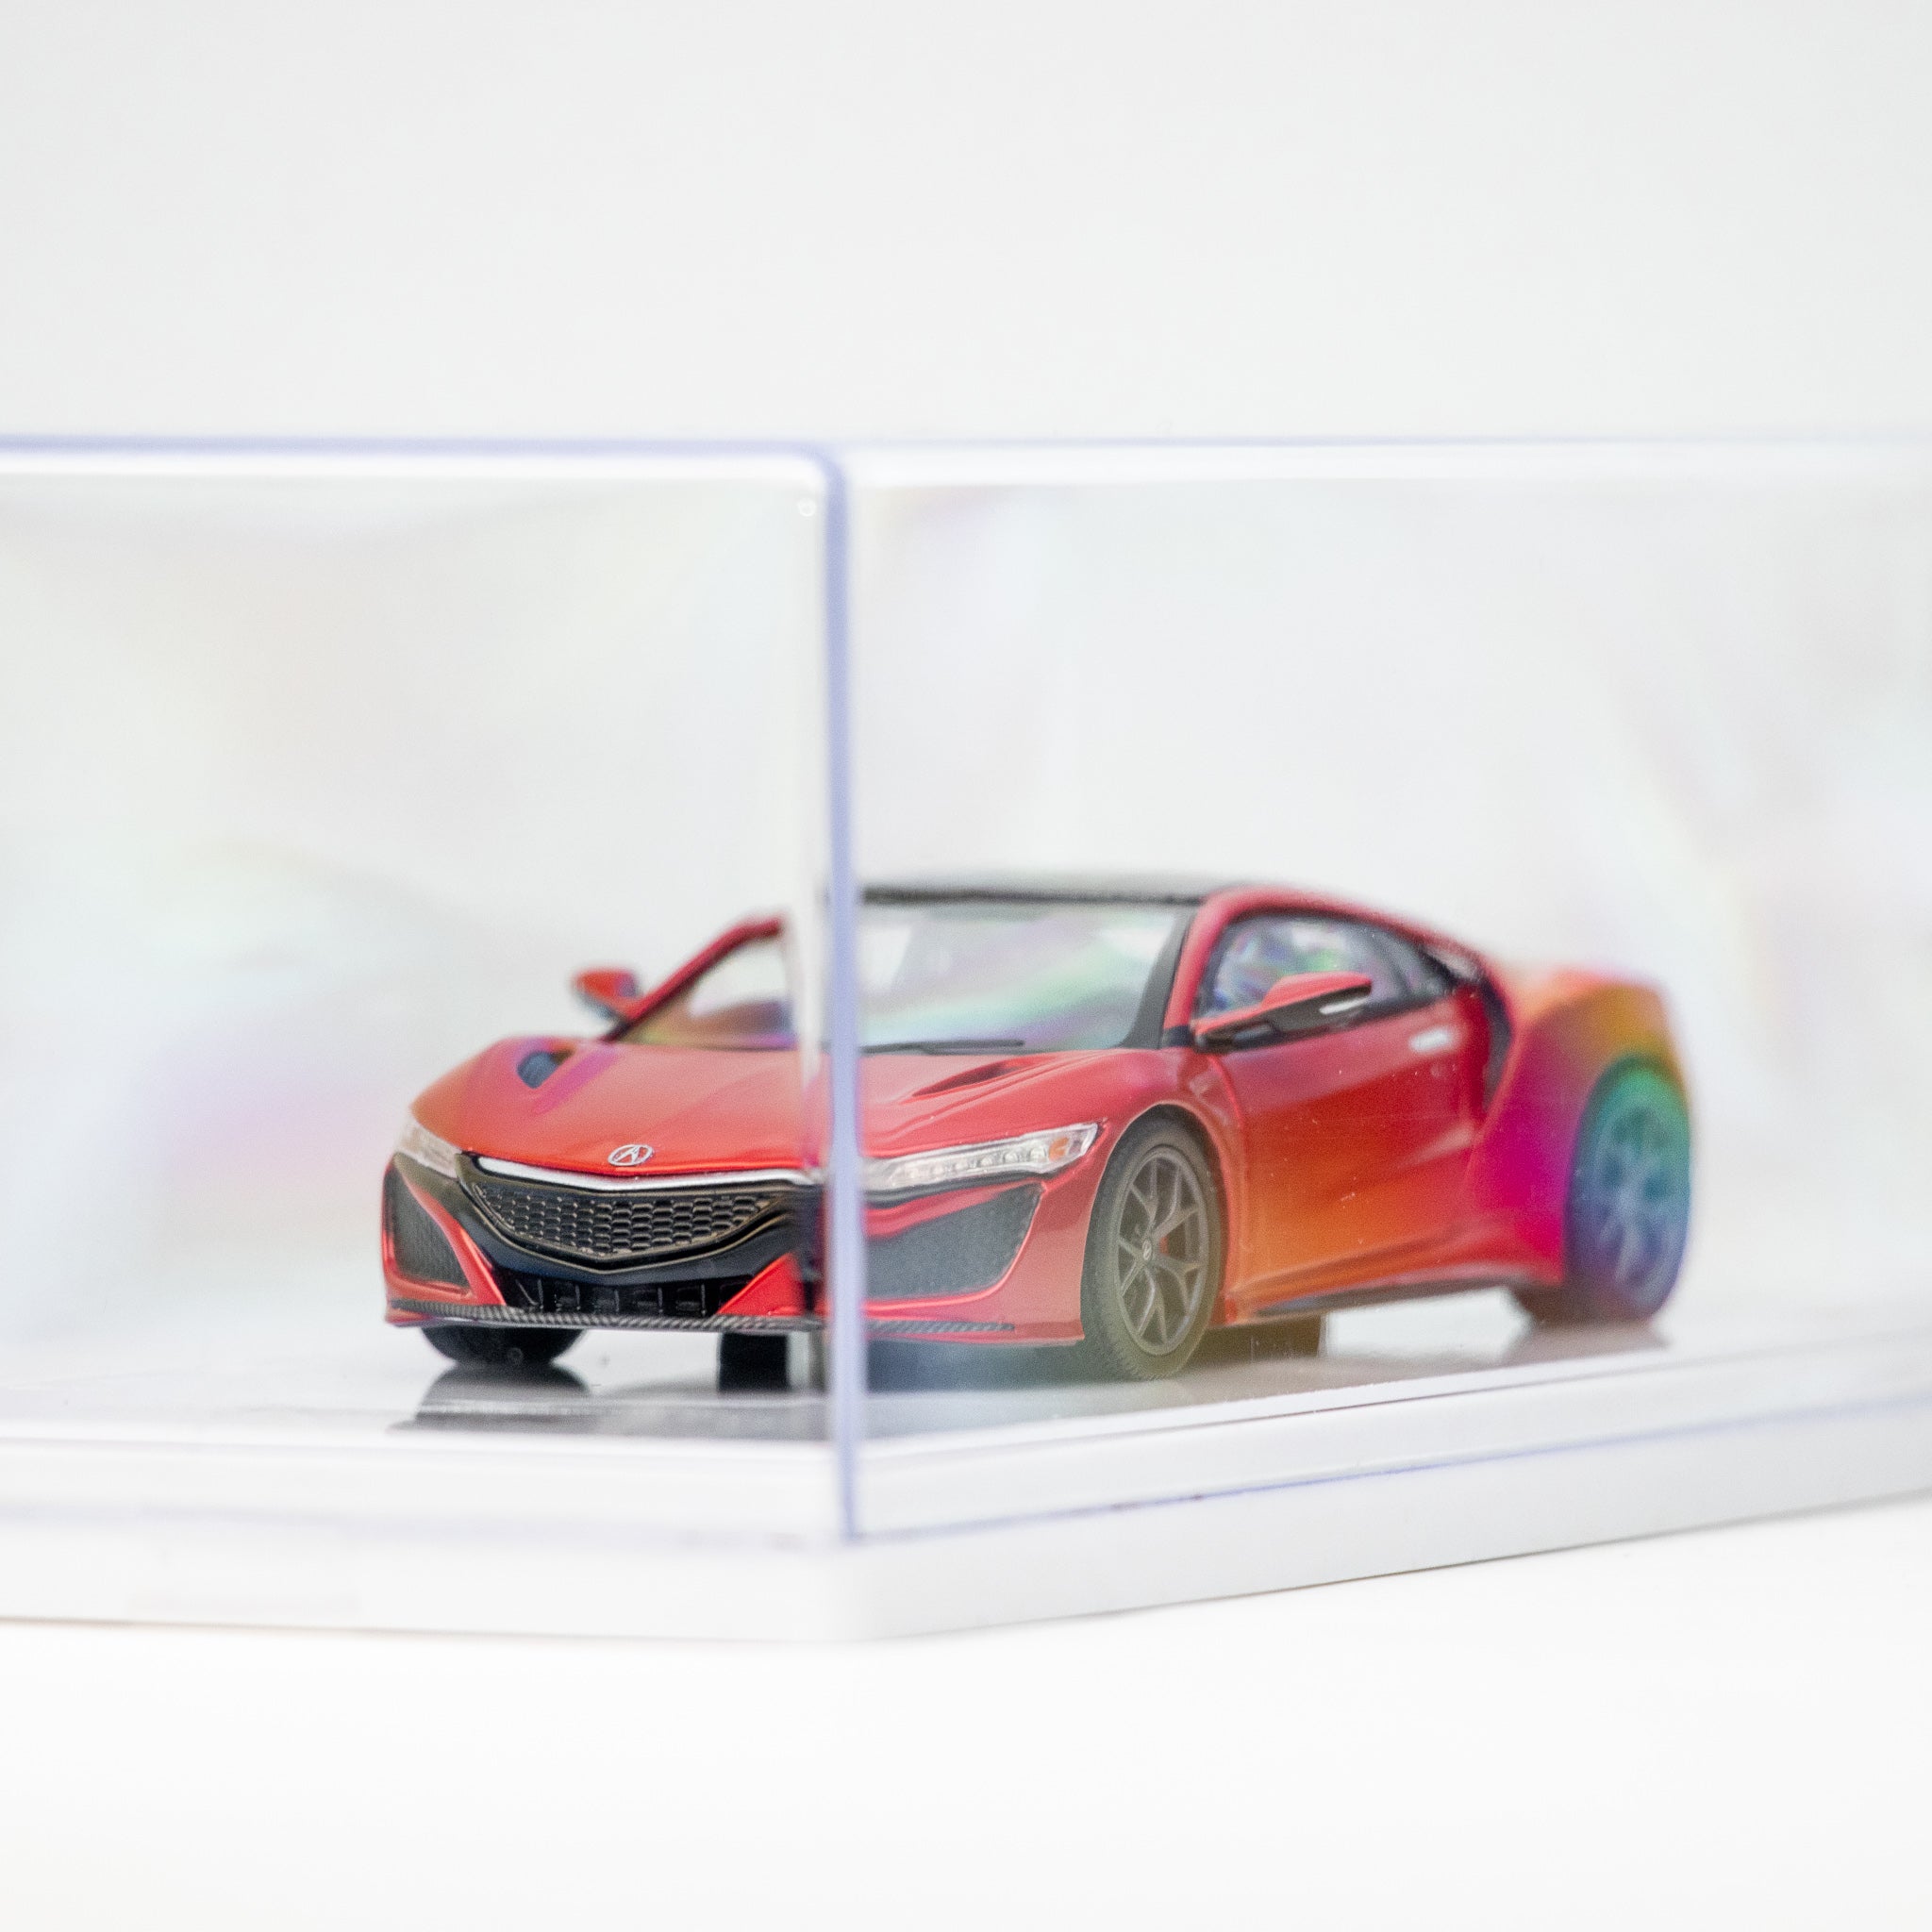 Acura NSX 1:43 Scale Model by TSM (ONLY 1 LEFT)